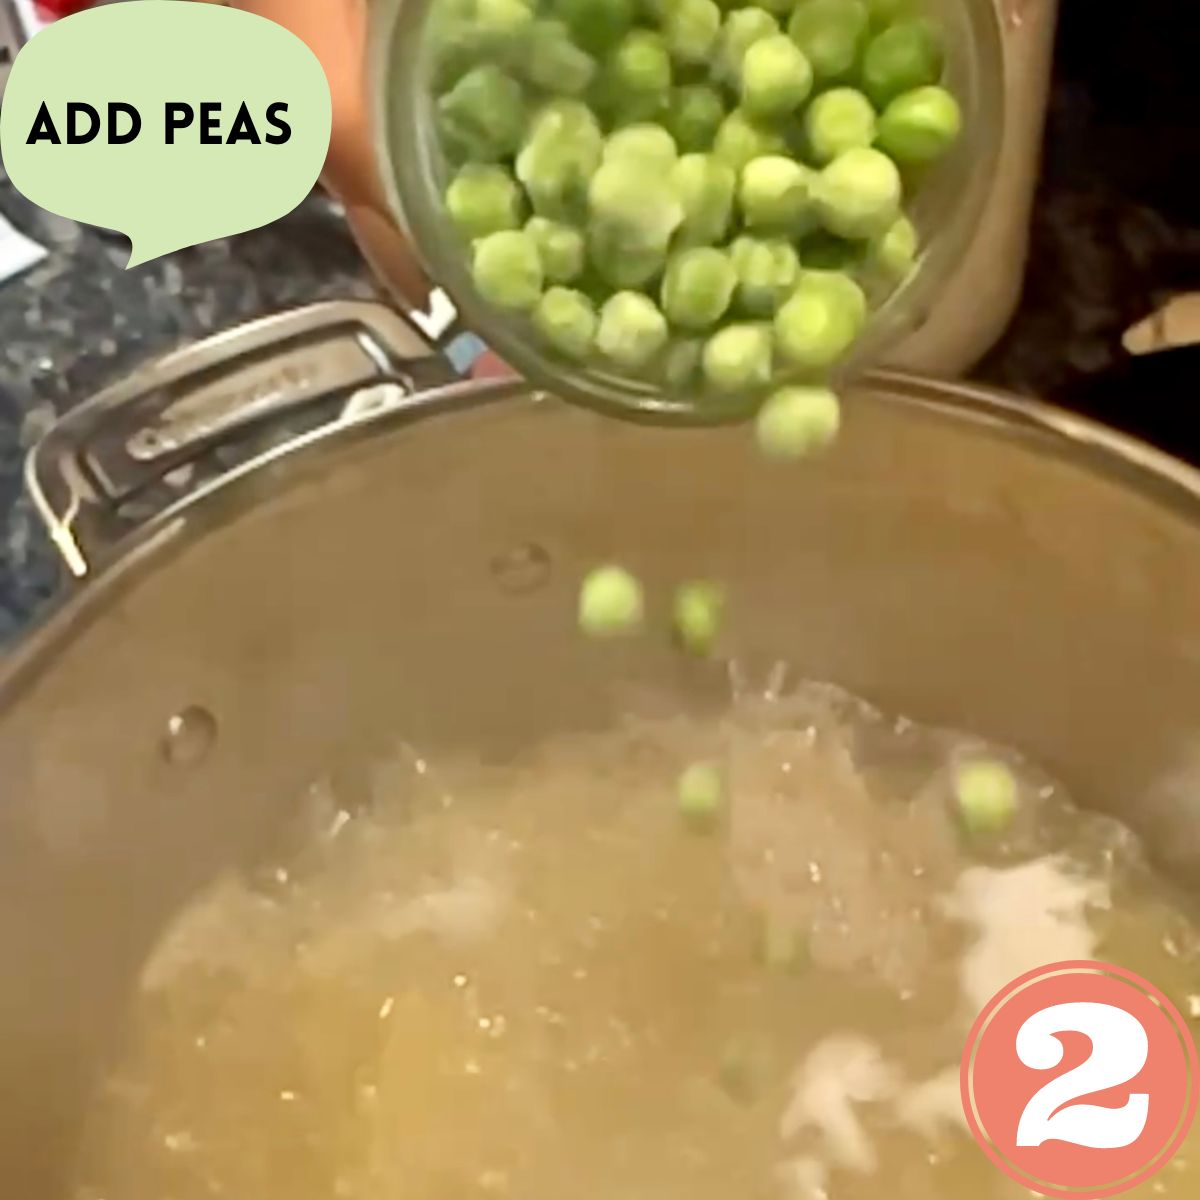 frozen peas being added to boiling water